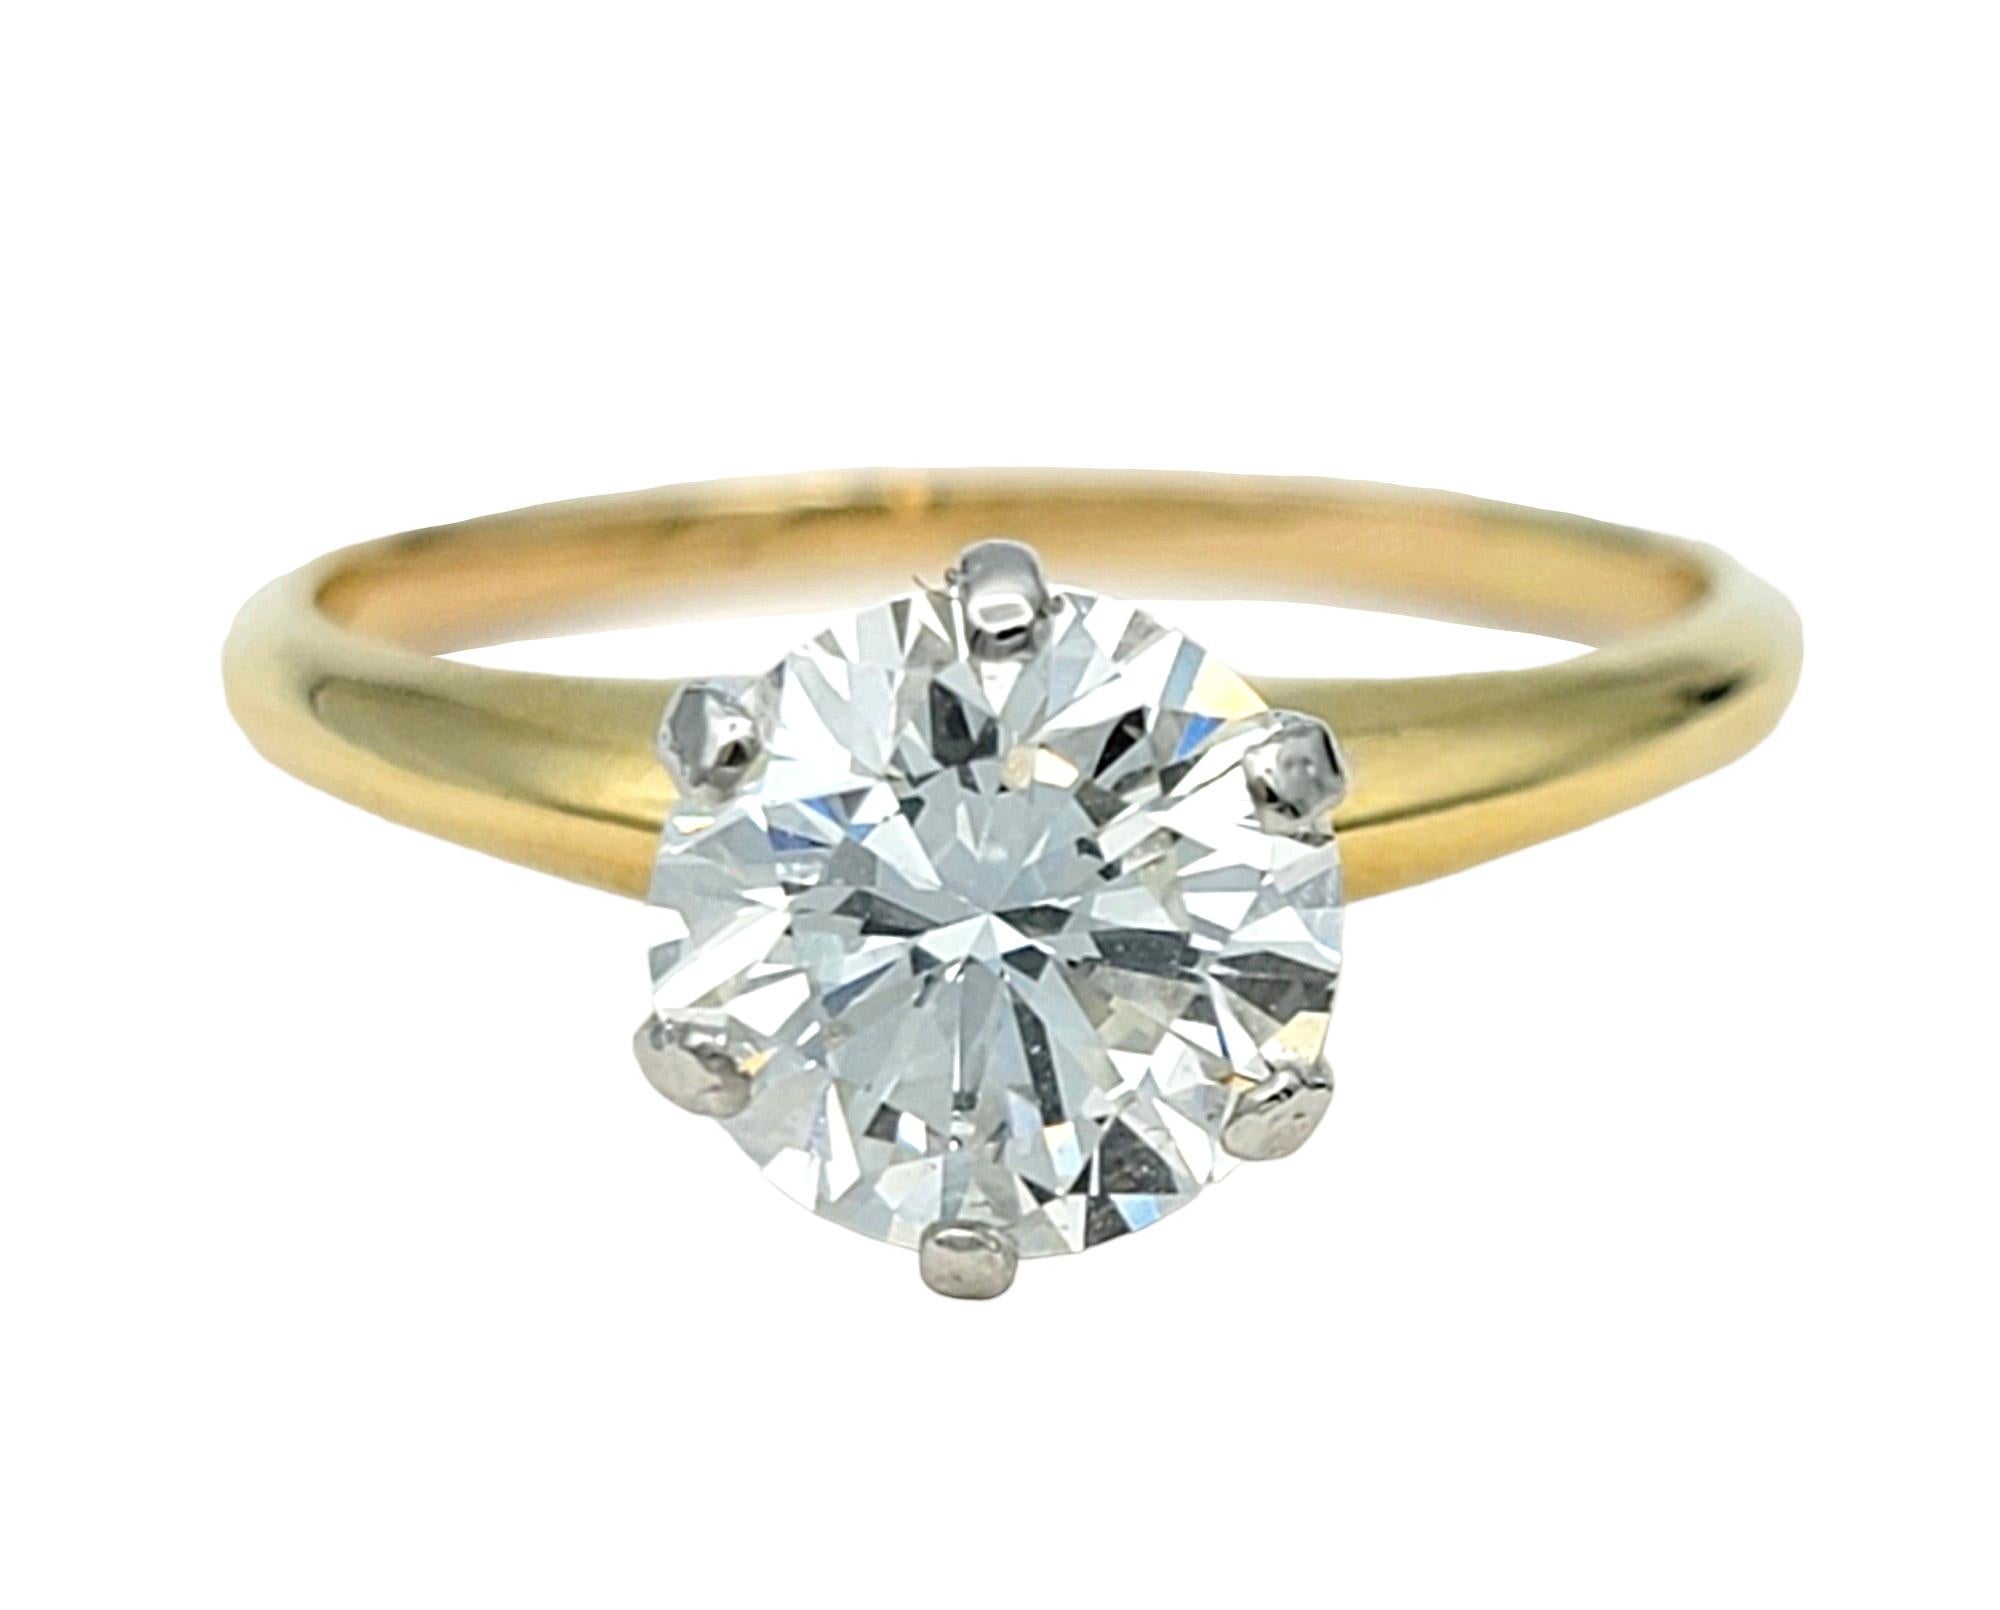 Tiffany & Co. 1.28 Carat Diamond Solitaire Ring with Wedding Band in 18K Gold For Sale 1